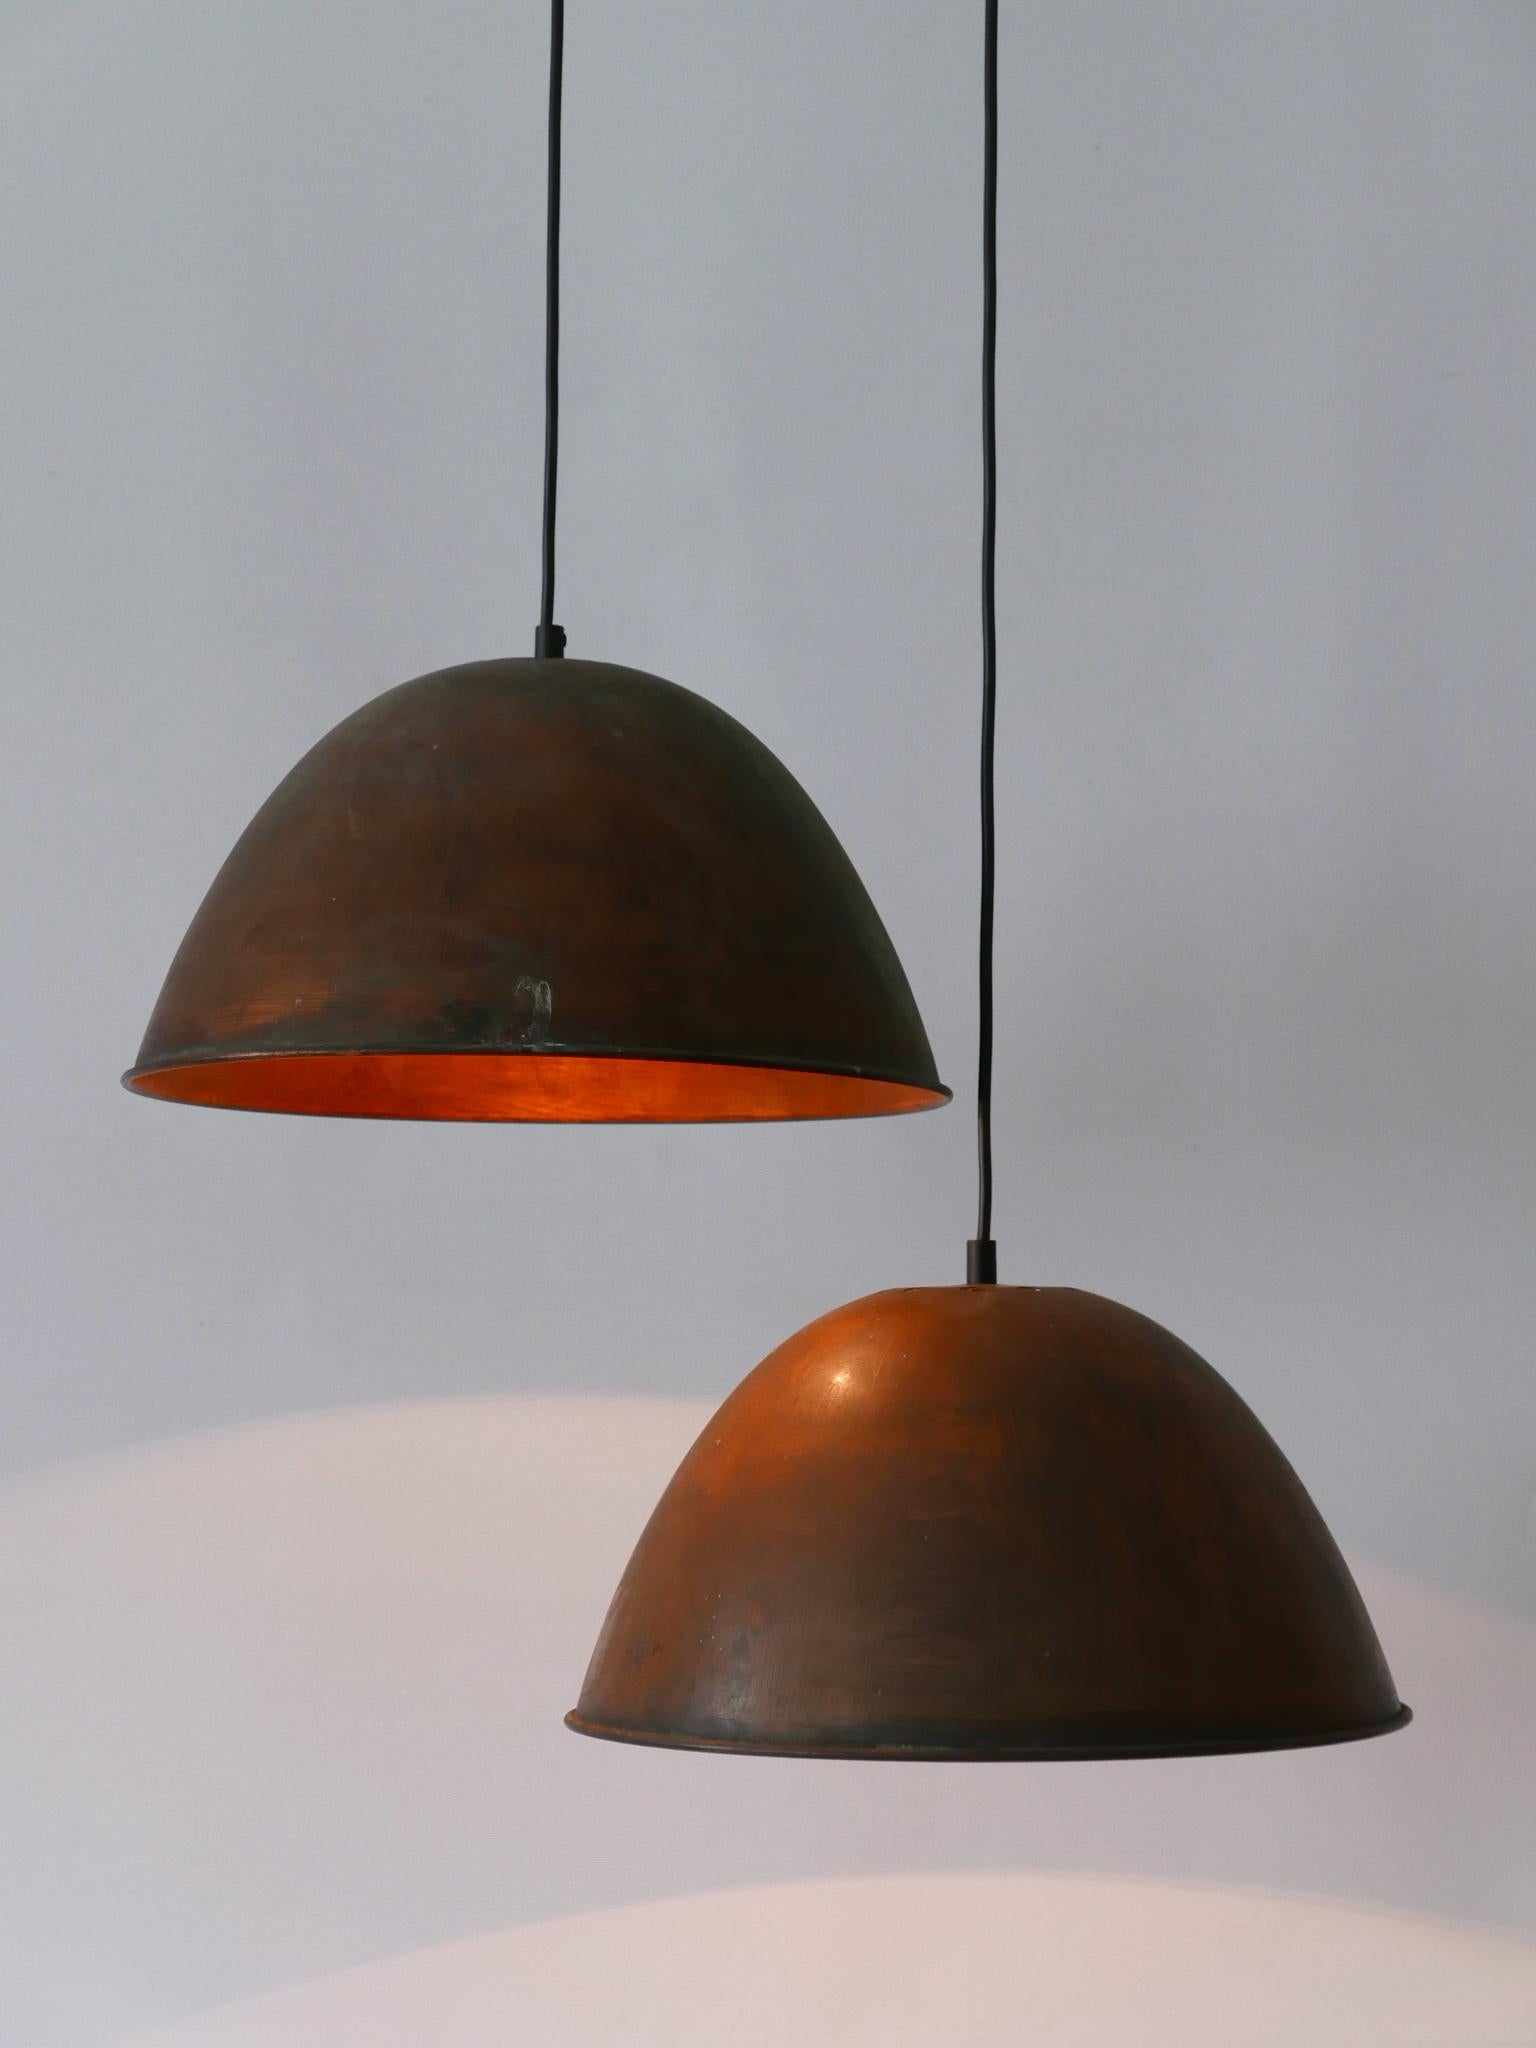 Rare, elegant and highly decorative Mid-Century Modern copper pendant lamps or hanging lights. Designed & manufactured in Germany, 1950s.

Executed in copper, each pendant lamp is executed with 1 x E27 / E26 Edison screw fit bulb socket, rewired and